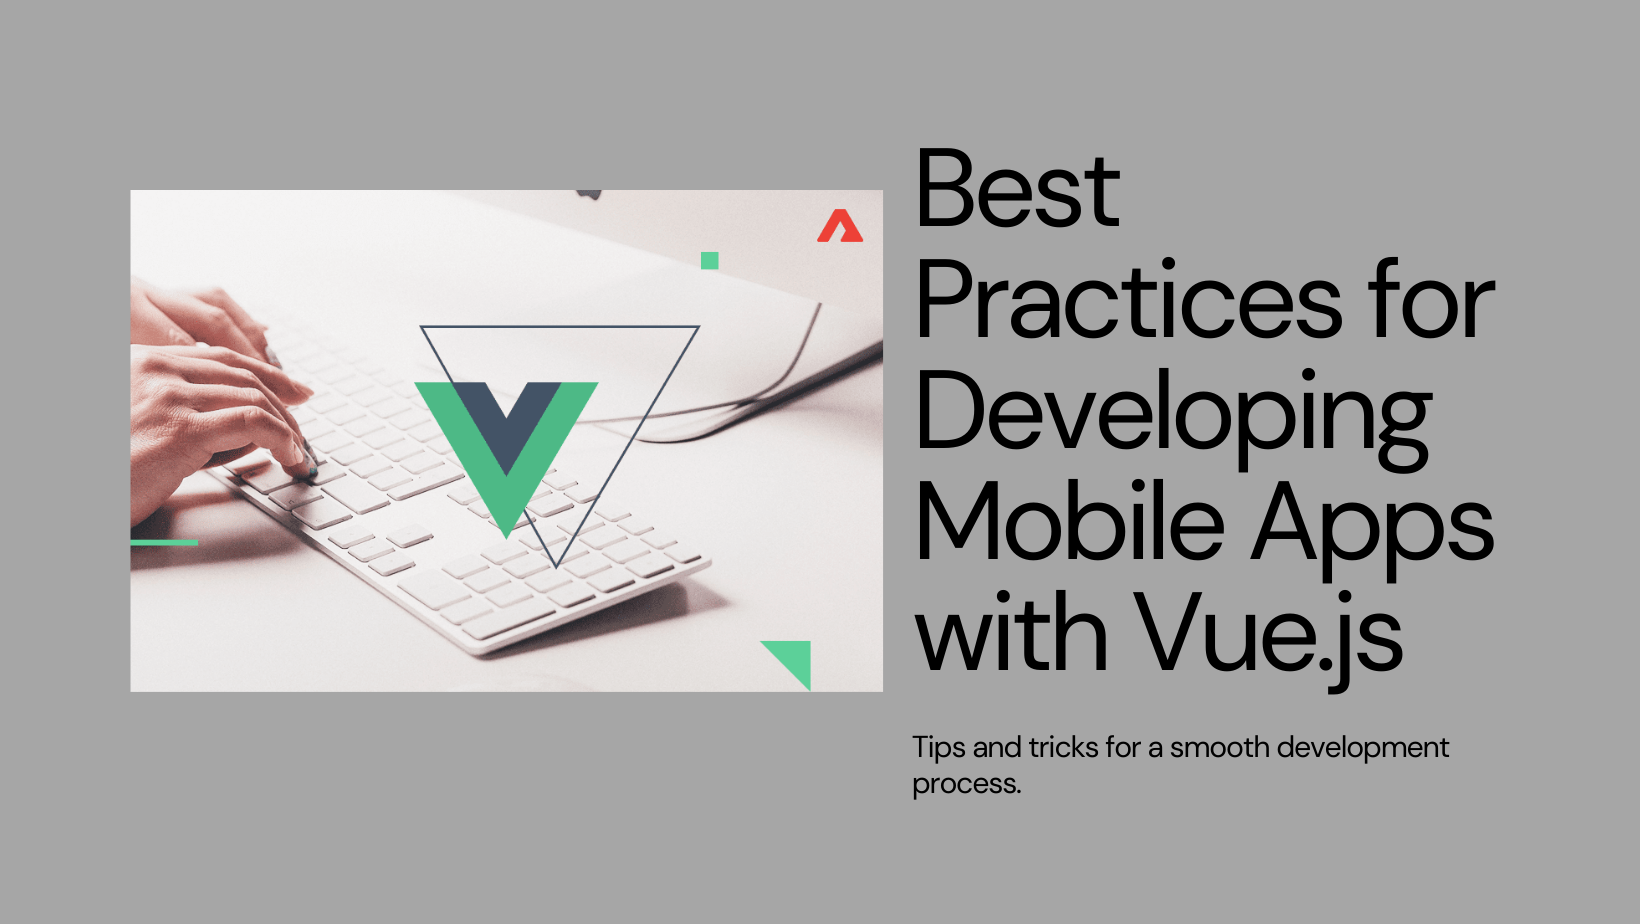 Best Practices for Developing Mobile Apps with Vue.js